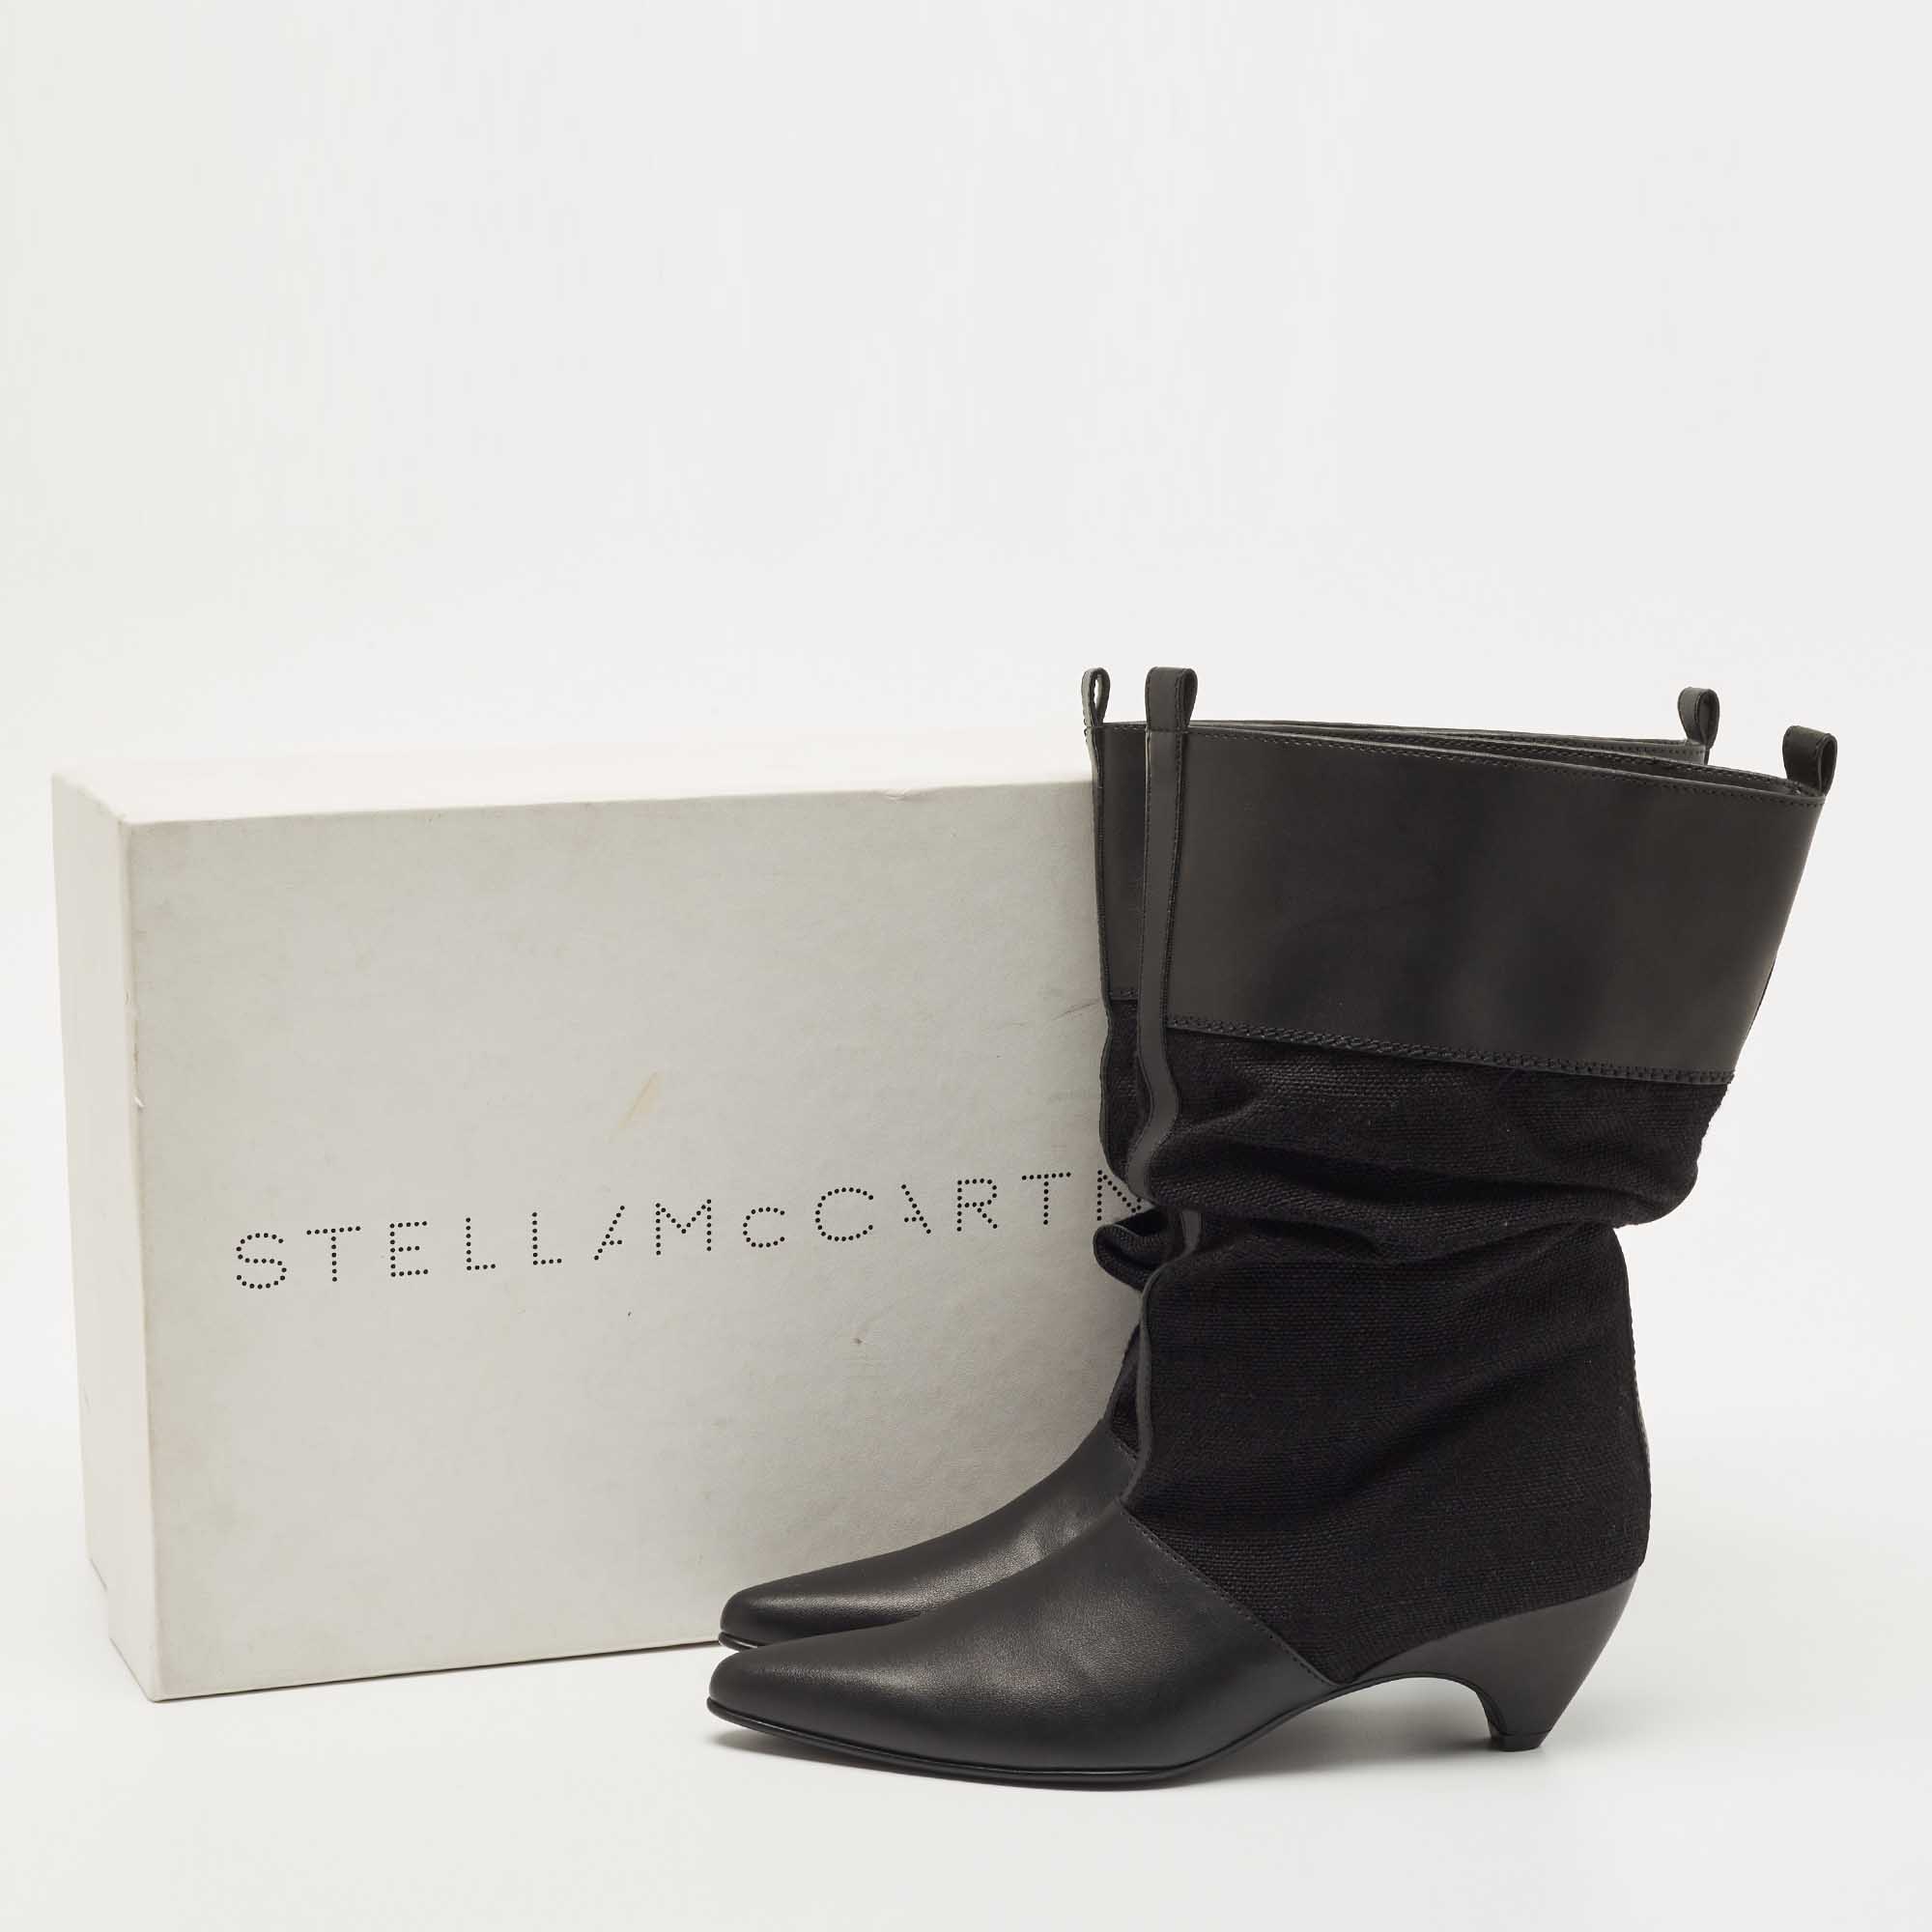 Stella McCartney Black Canvas And Faux Leather Pointed Toe Ankle Boots Size 36